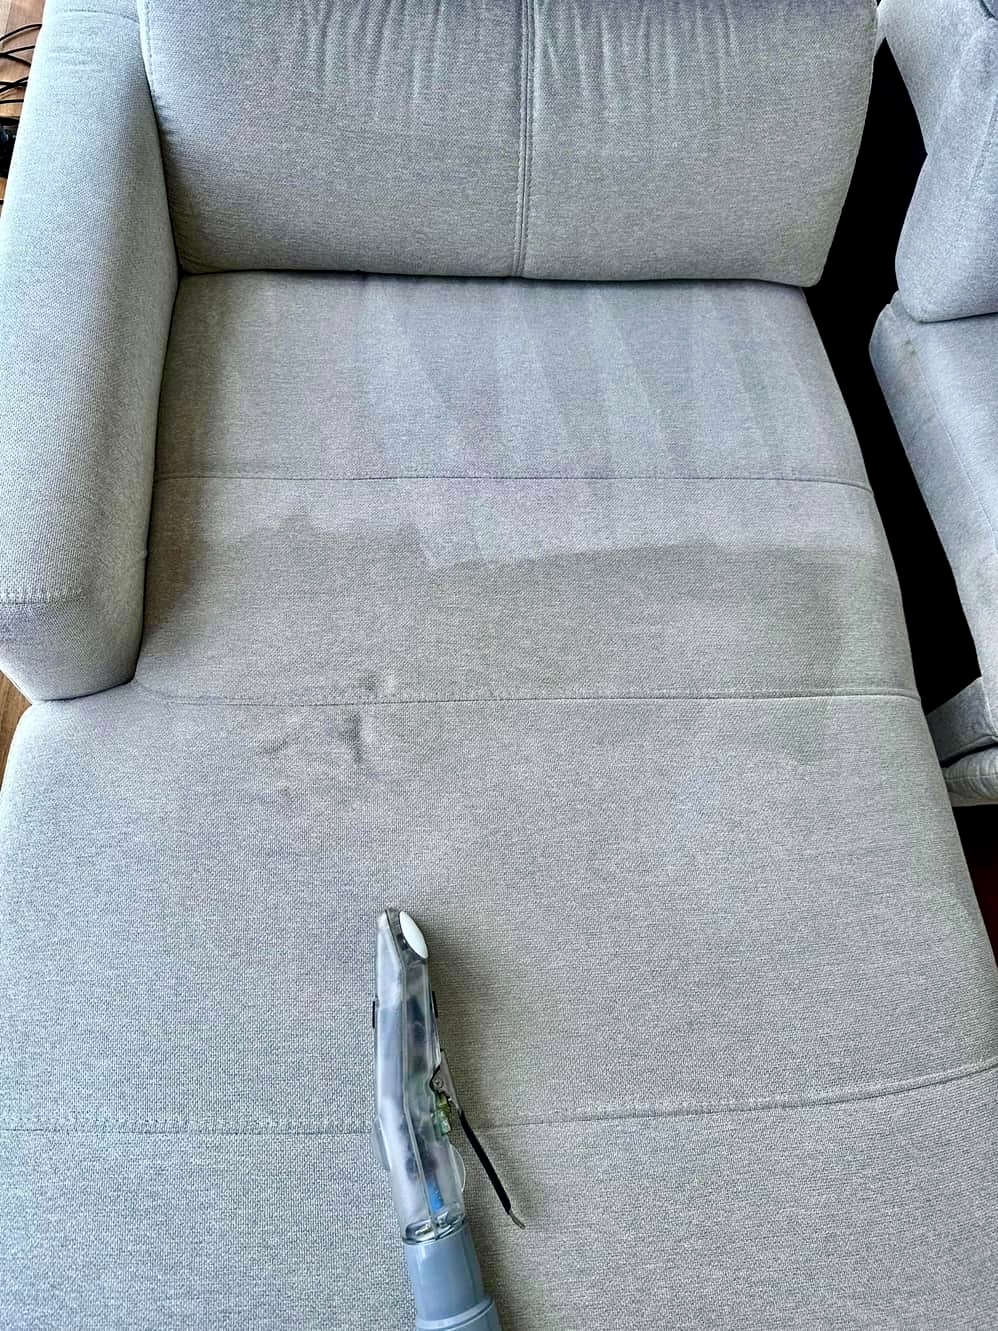 clean couch in lake nona, fl